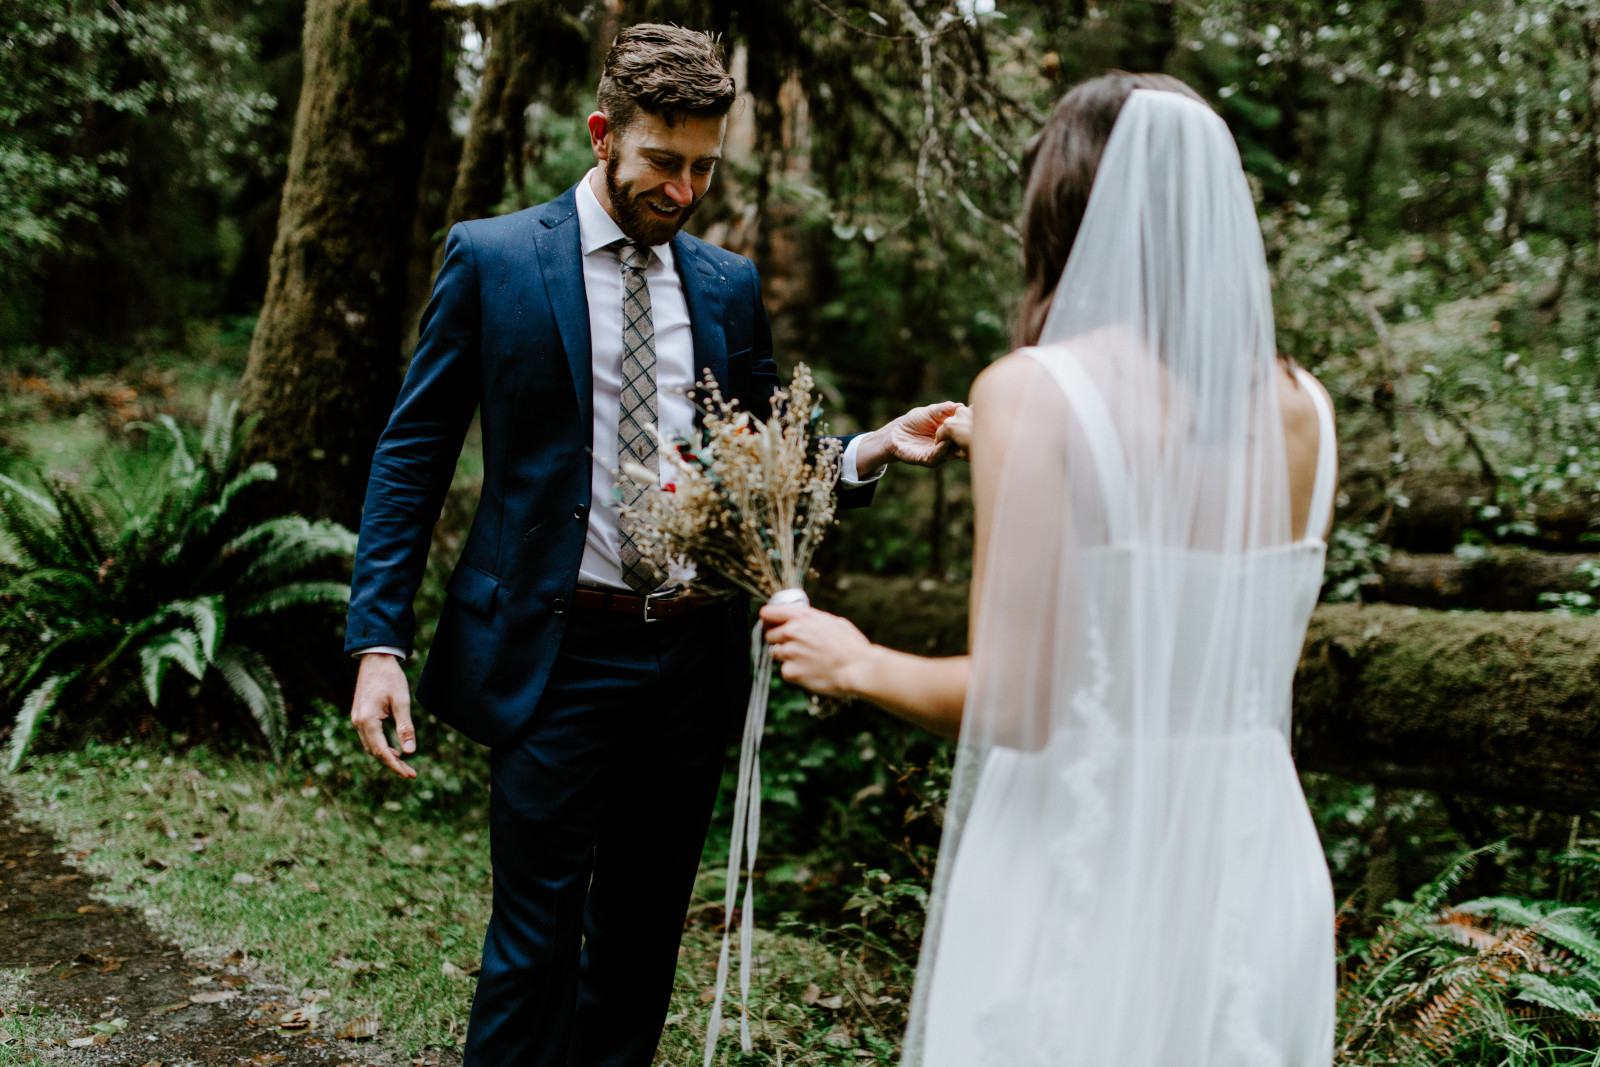 Corey and Mollie check out their outfits. Elopement photography in the Olympic National Park by Sienna Plus Josh.